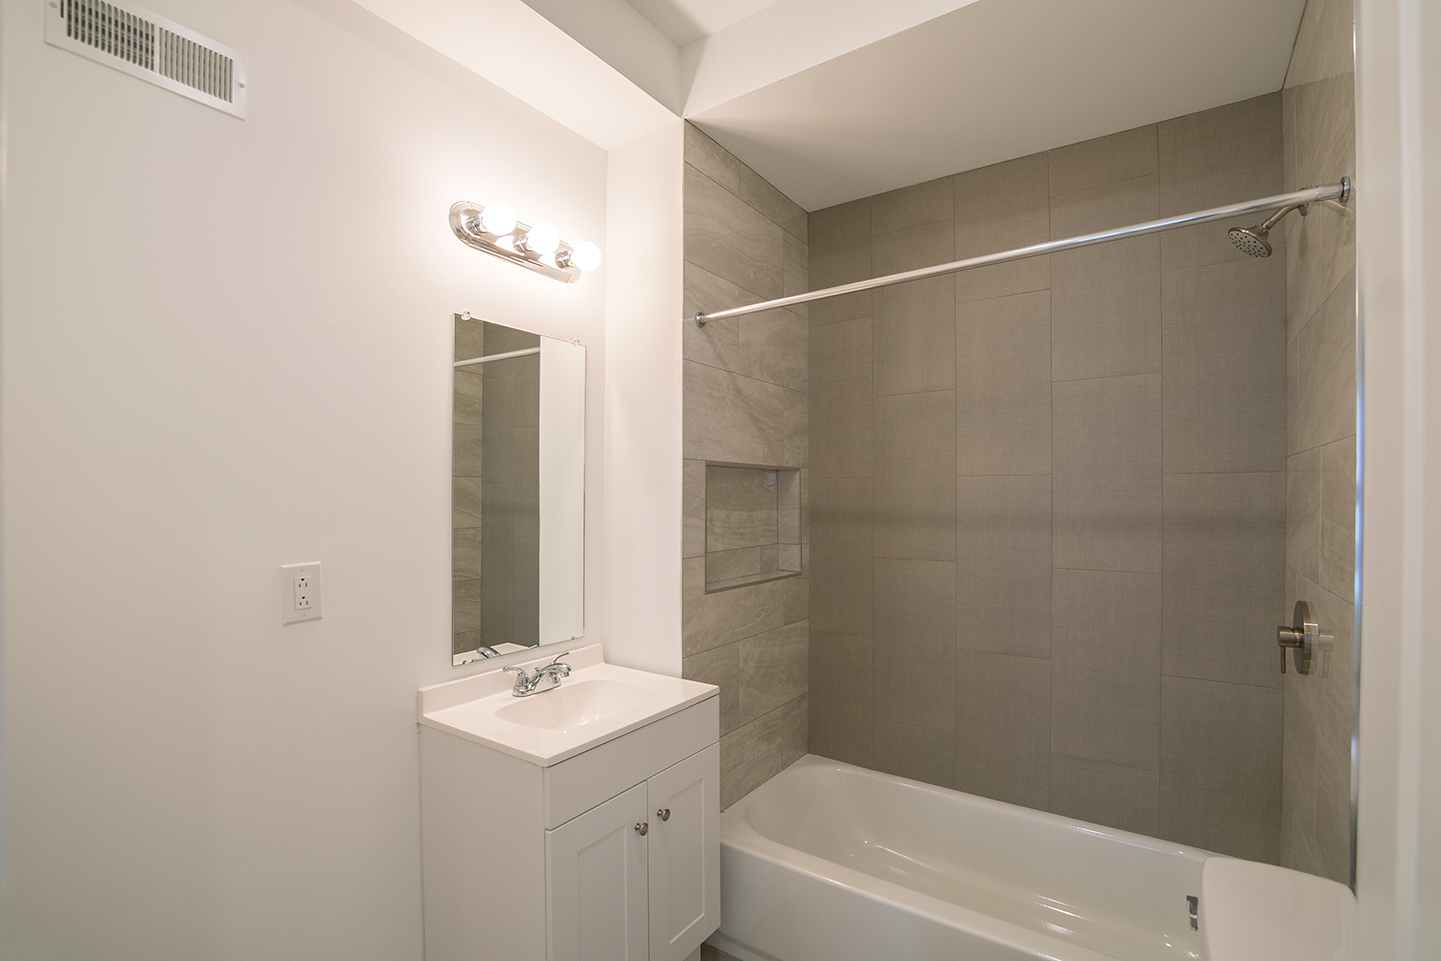 Property Photo For 1107 S 27th St, Unit A